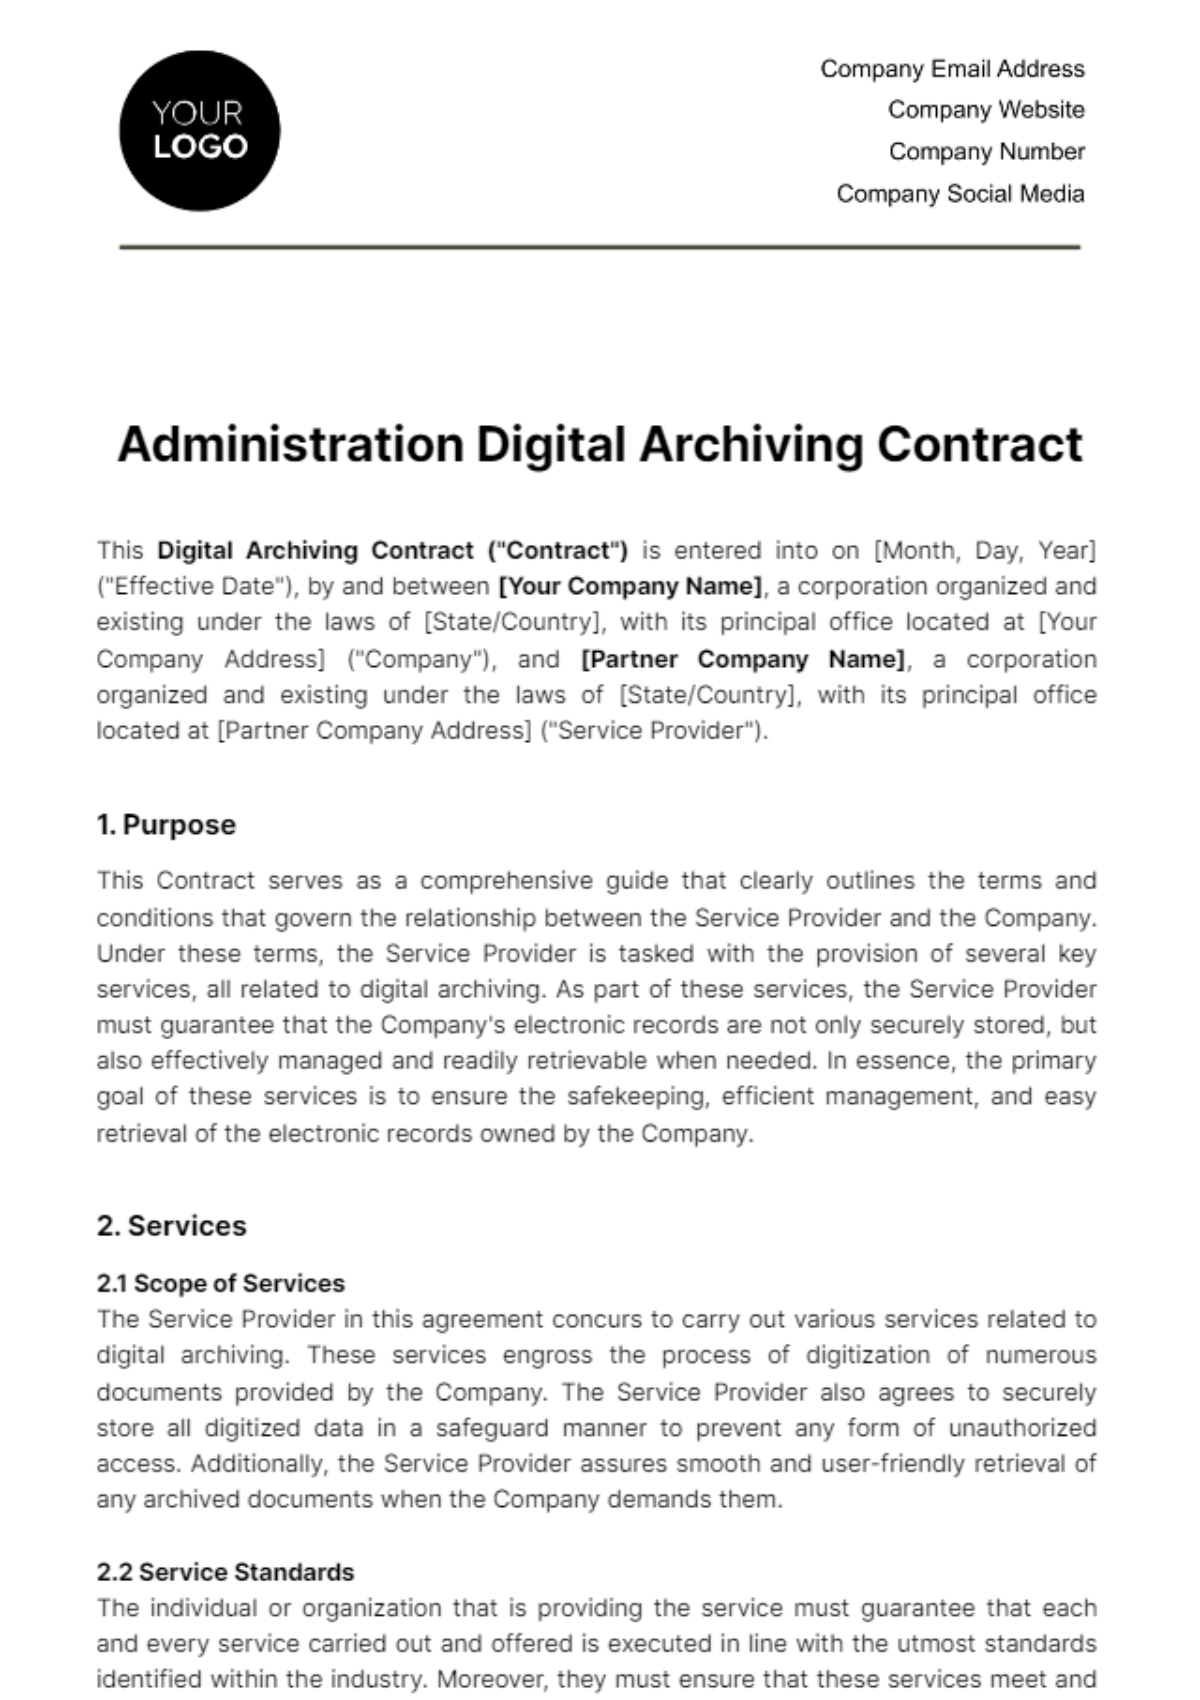 Free Administration Digital Archiving Contract Template